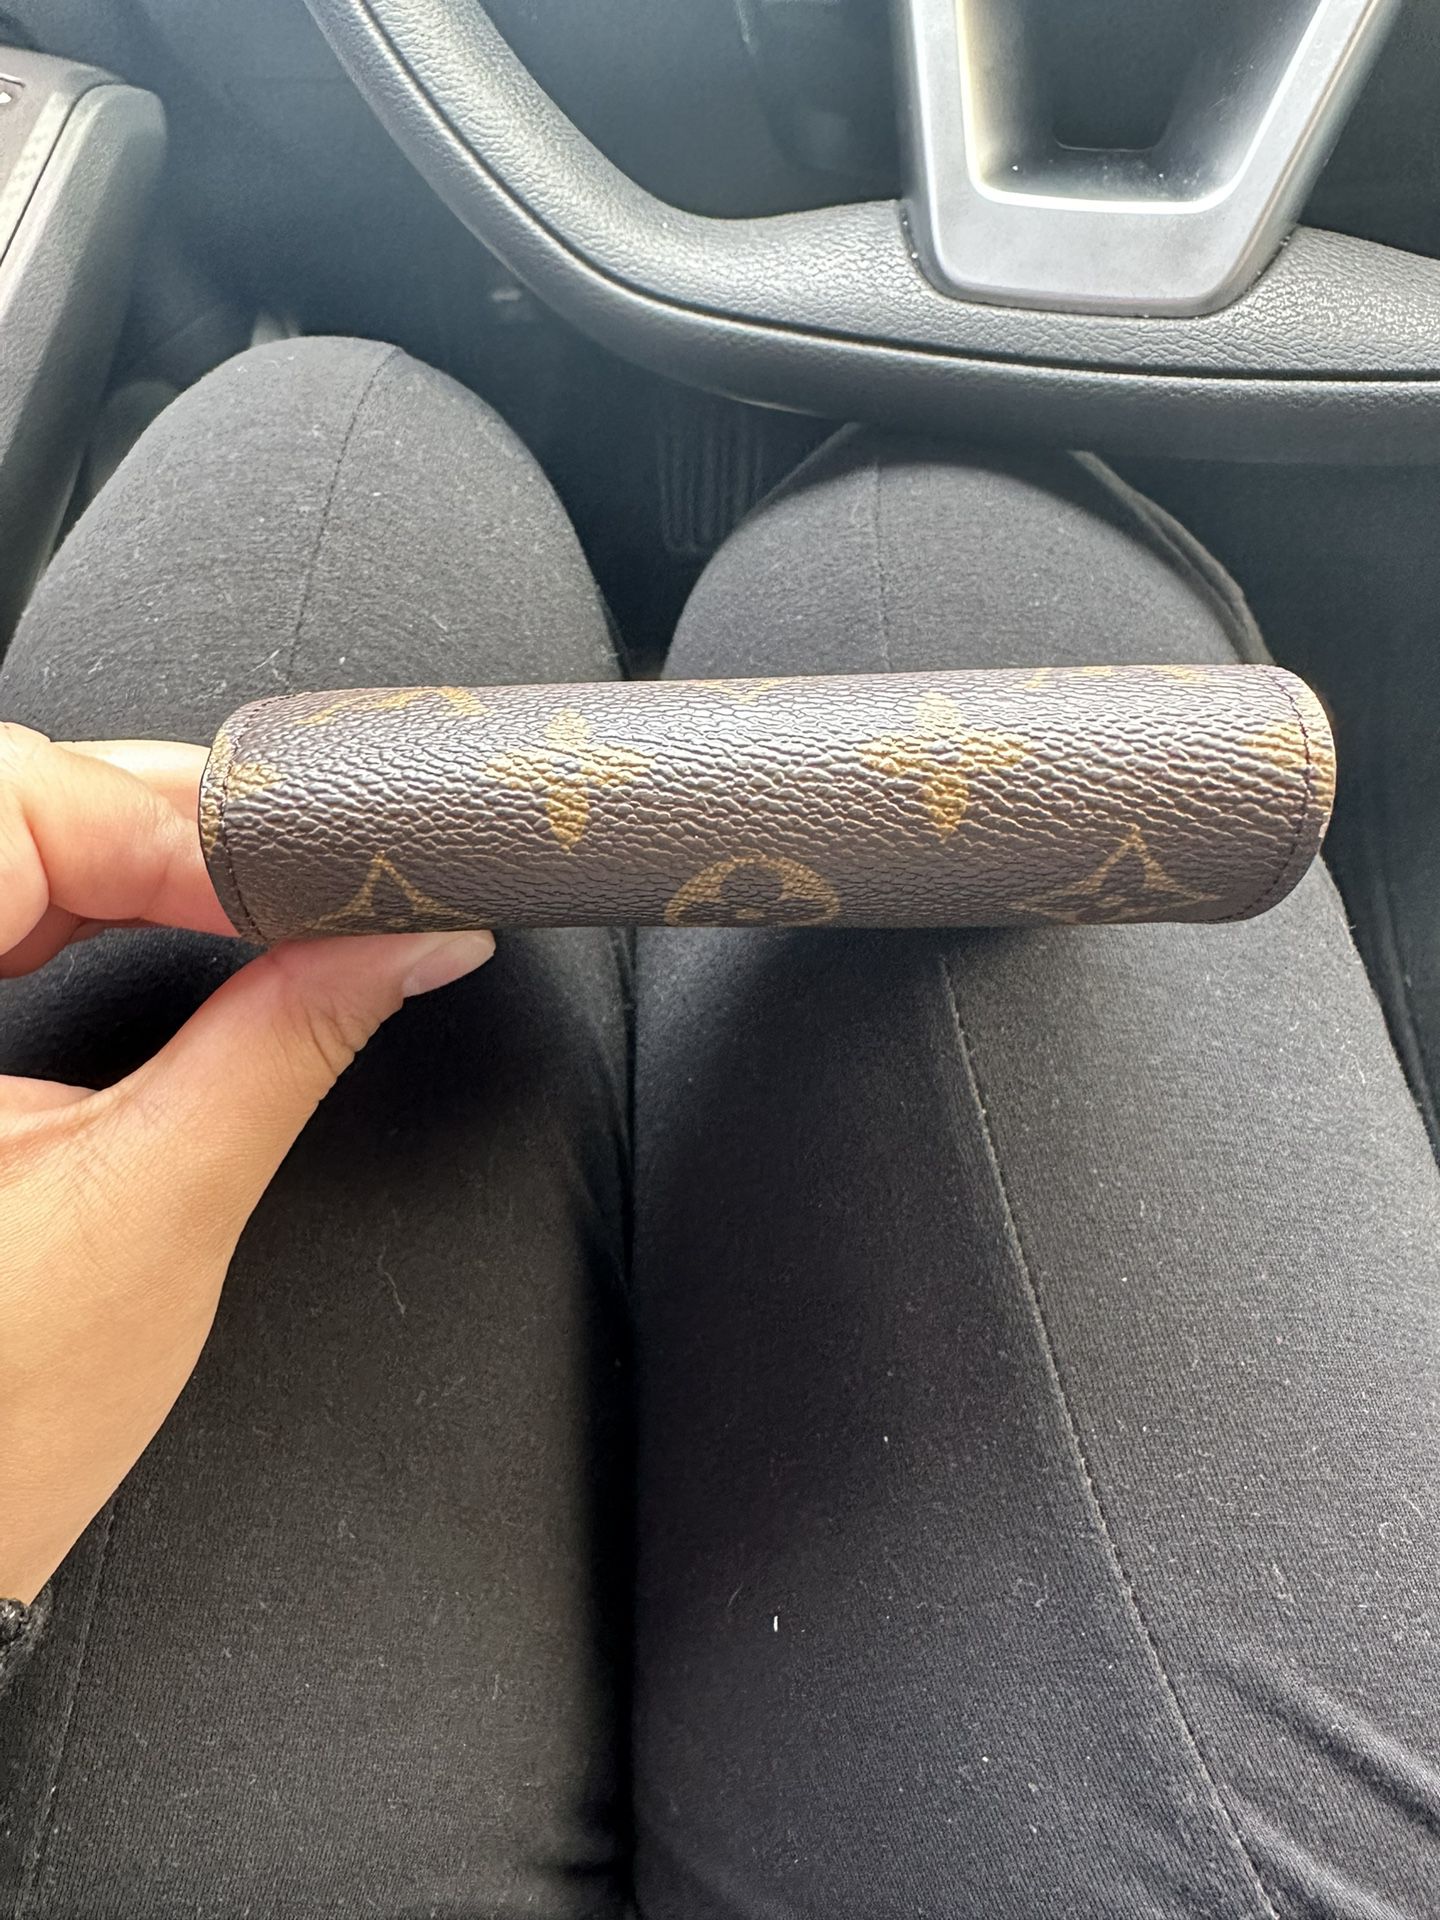 Louis Vuitton Victorine Wallet for Sale in Los Angeles, CA - OfferUp